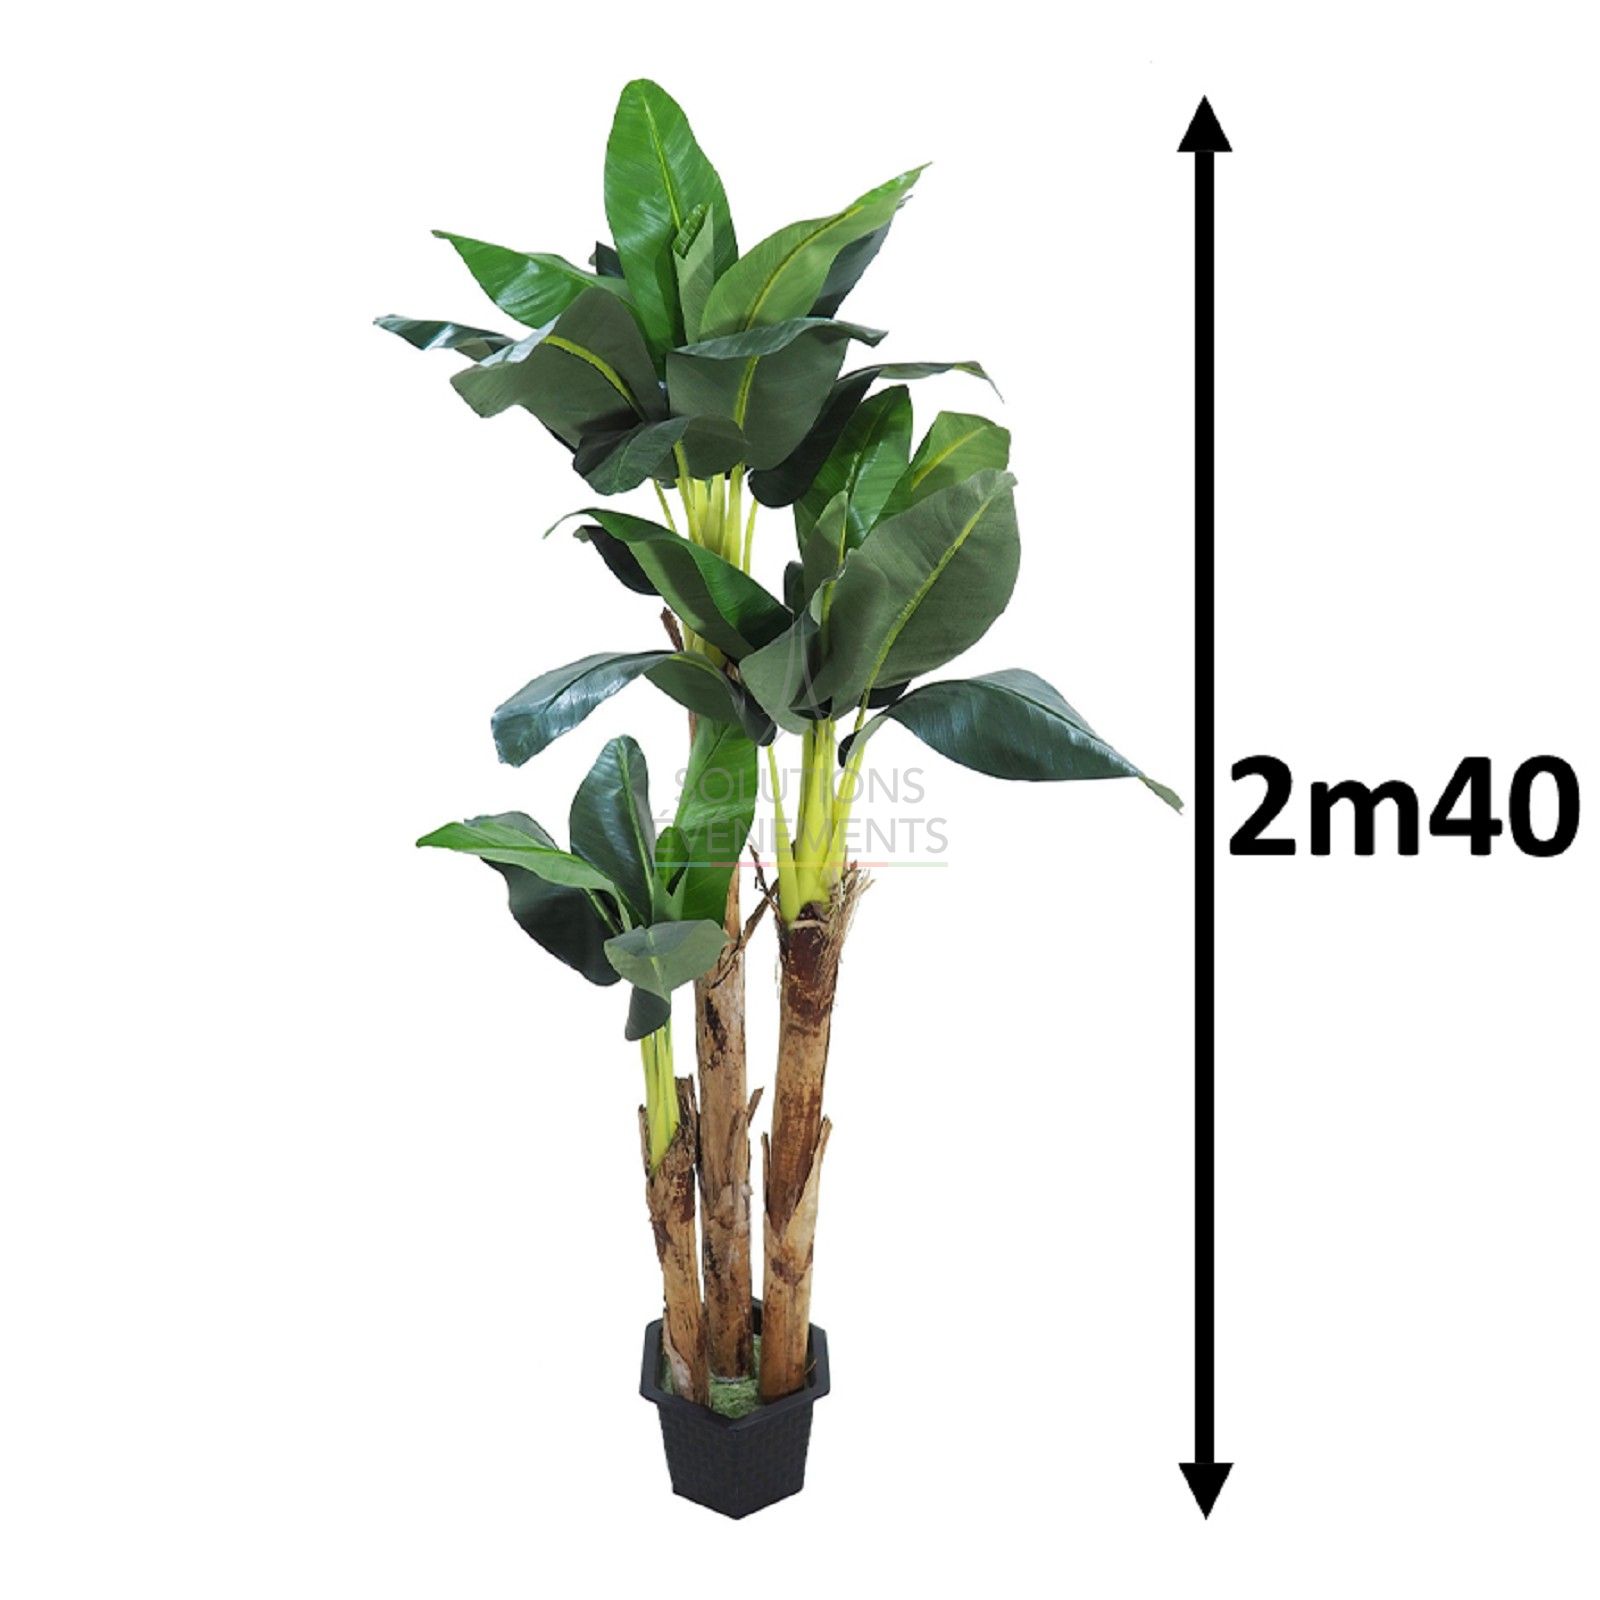 Banana tree rental with a height of 2m40